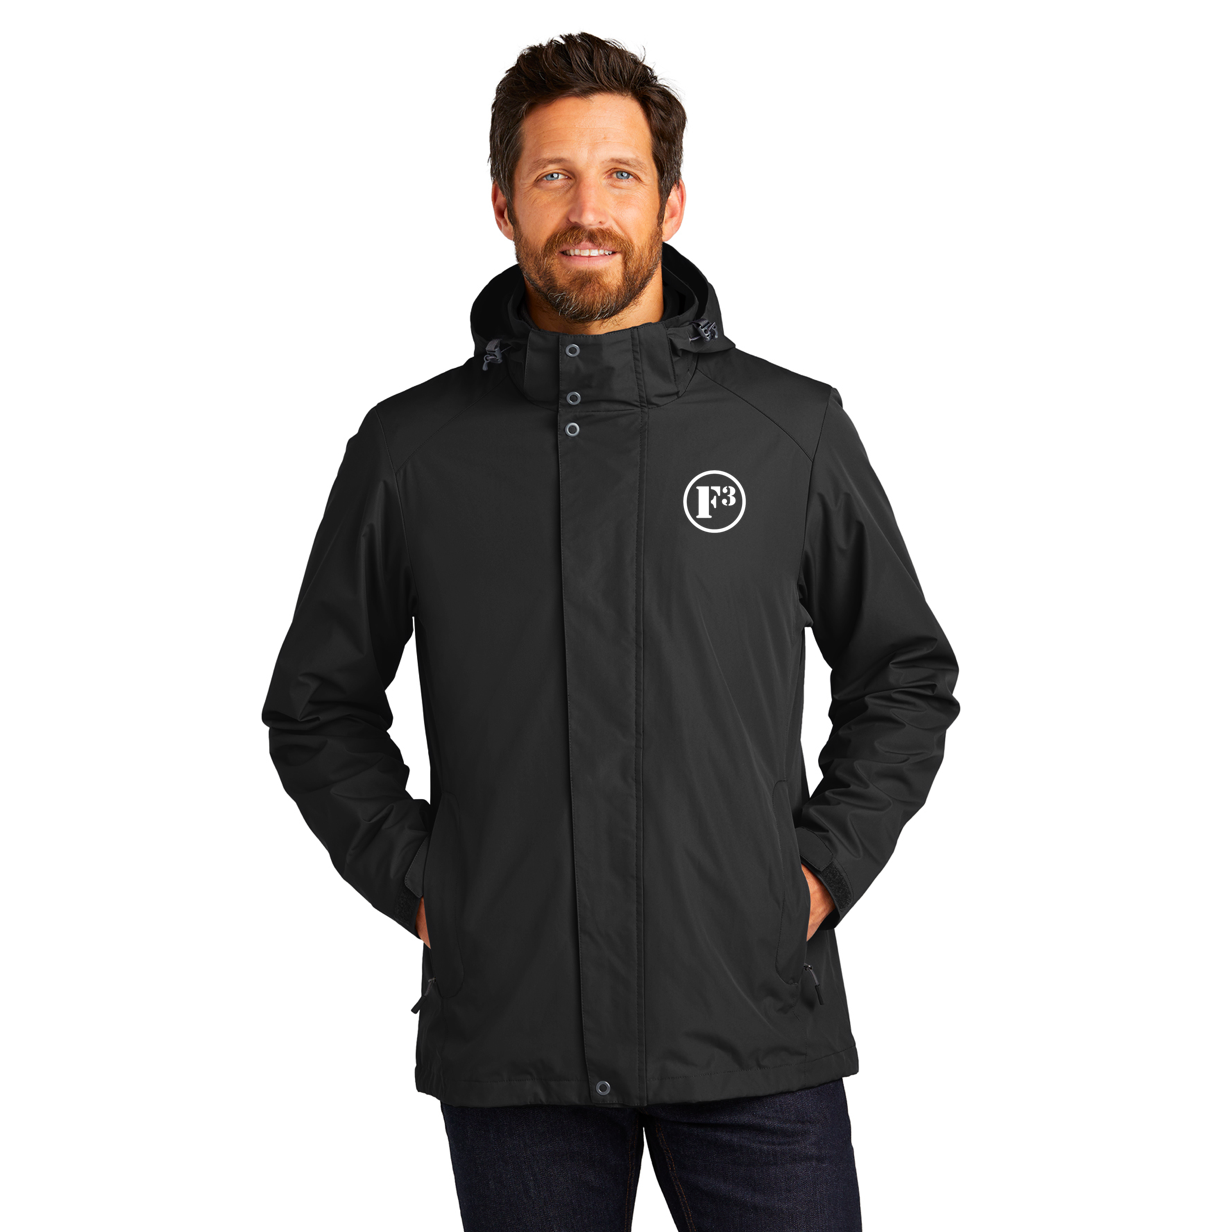 CLEARANCE ITEM - F3 Port Authority All-Weather 3-in-1 Jacket (Black-XL)